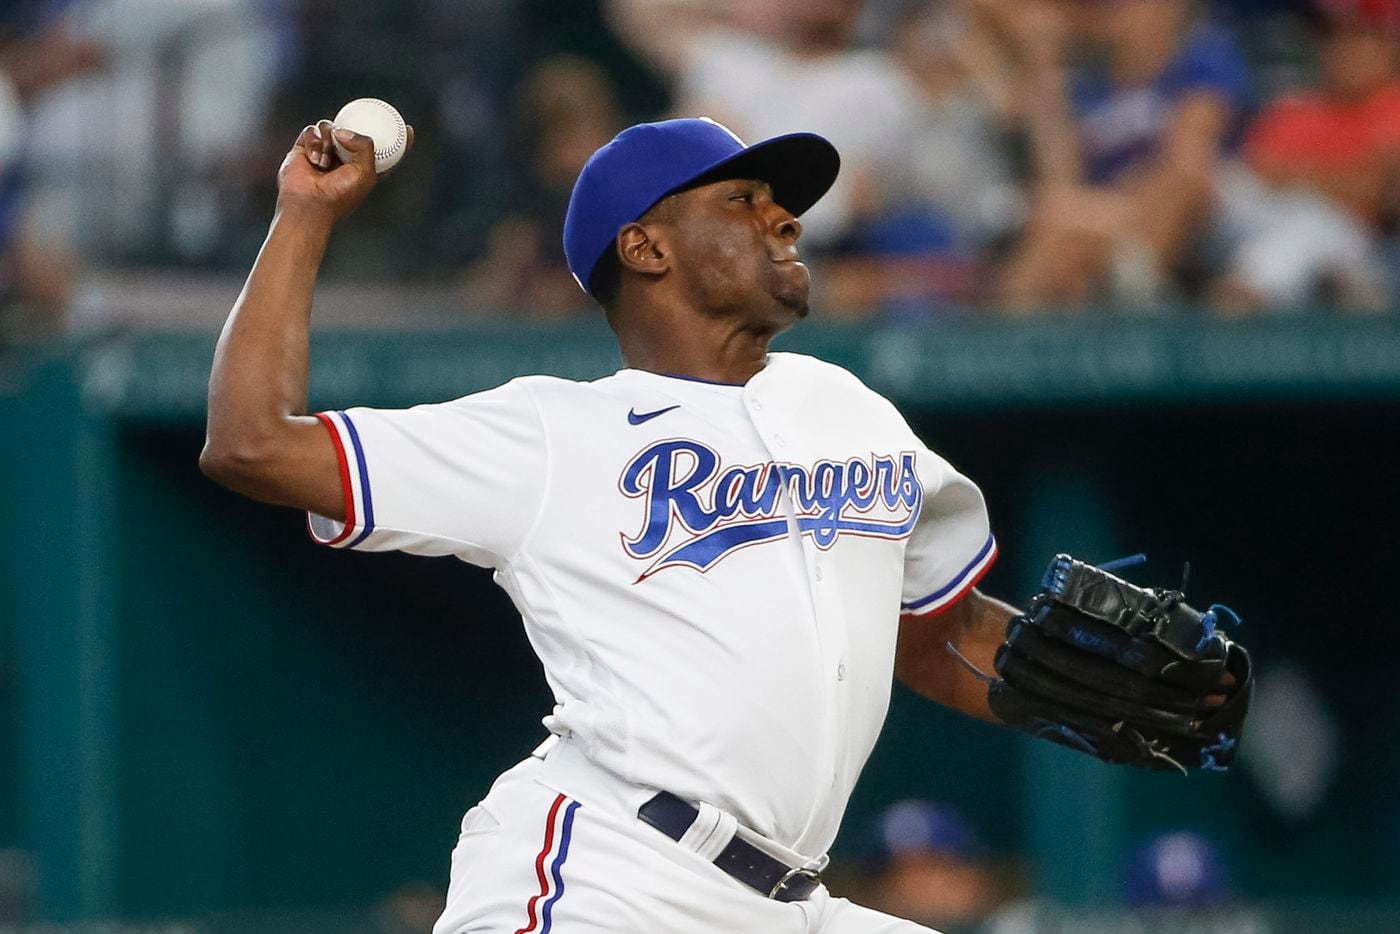 Texas Rangers relief pitcher Jharel Cotton (45) pitches during the eighth inning against the Los Angeles Angels at Globe Life Field on Thursday, Aug. 5, 2021, in Arlington. (Elias Valverde II/The Dallas Morning News)